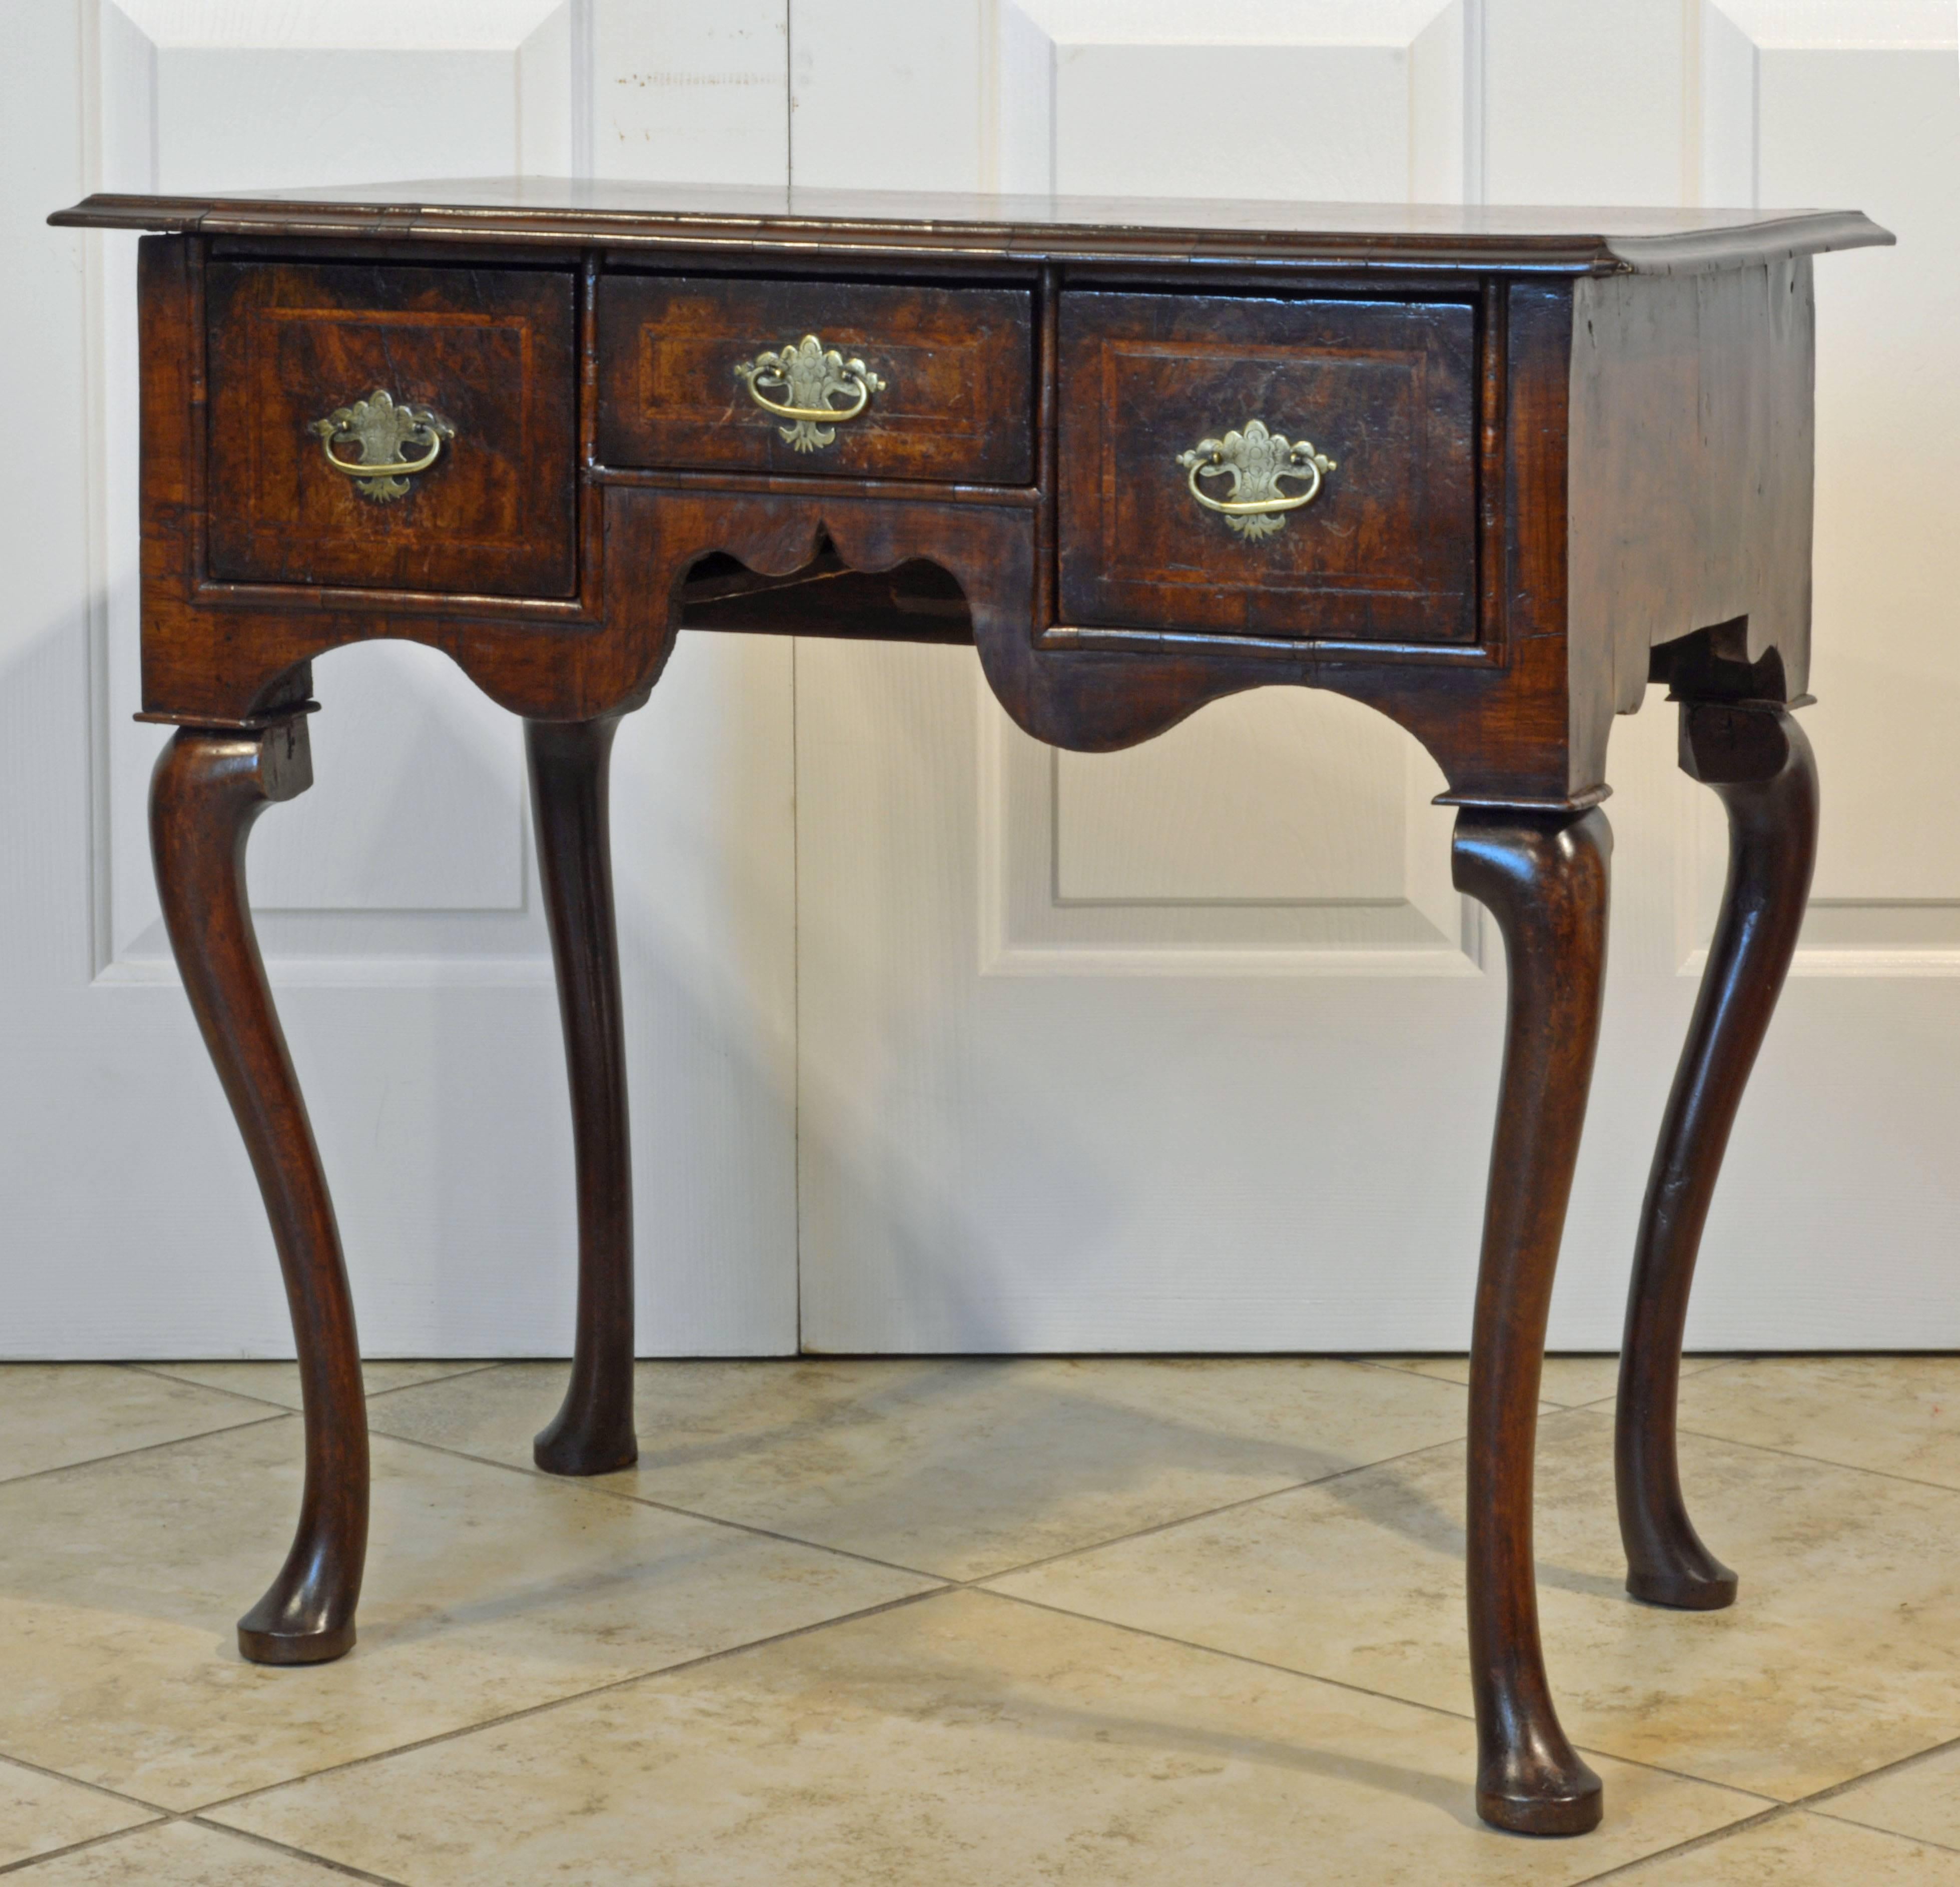 This fine 18th century dressing table or low boy features a cross banded and herring bone stringed top above three similarly banded drawers and a shaped apron resting on four cabriole legs ending in pad feet.